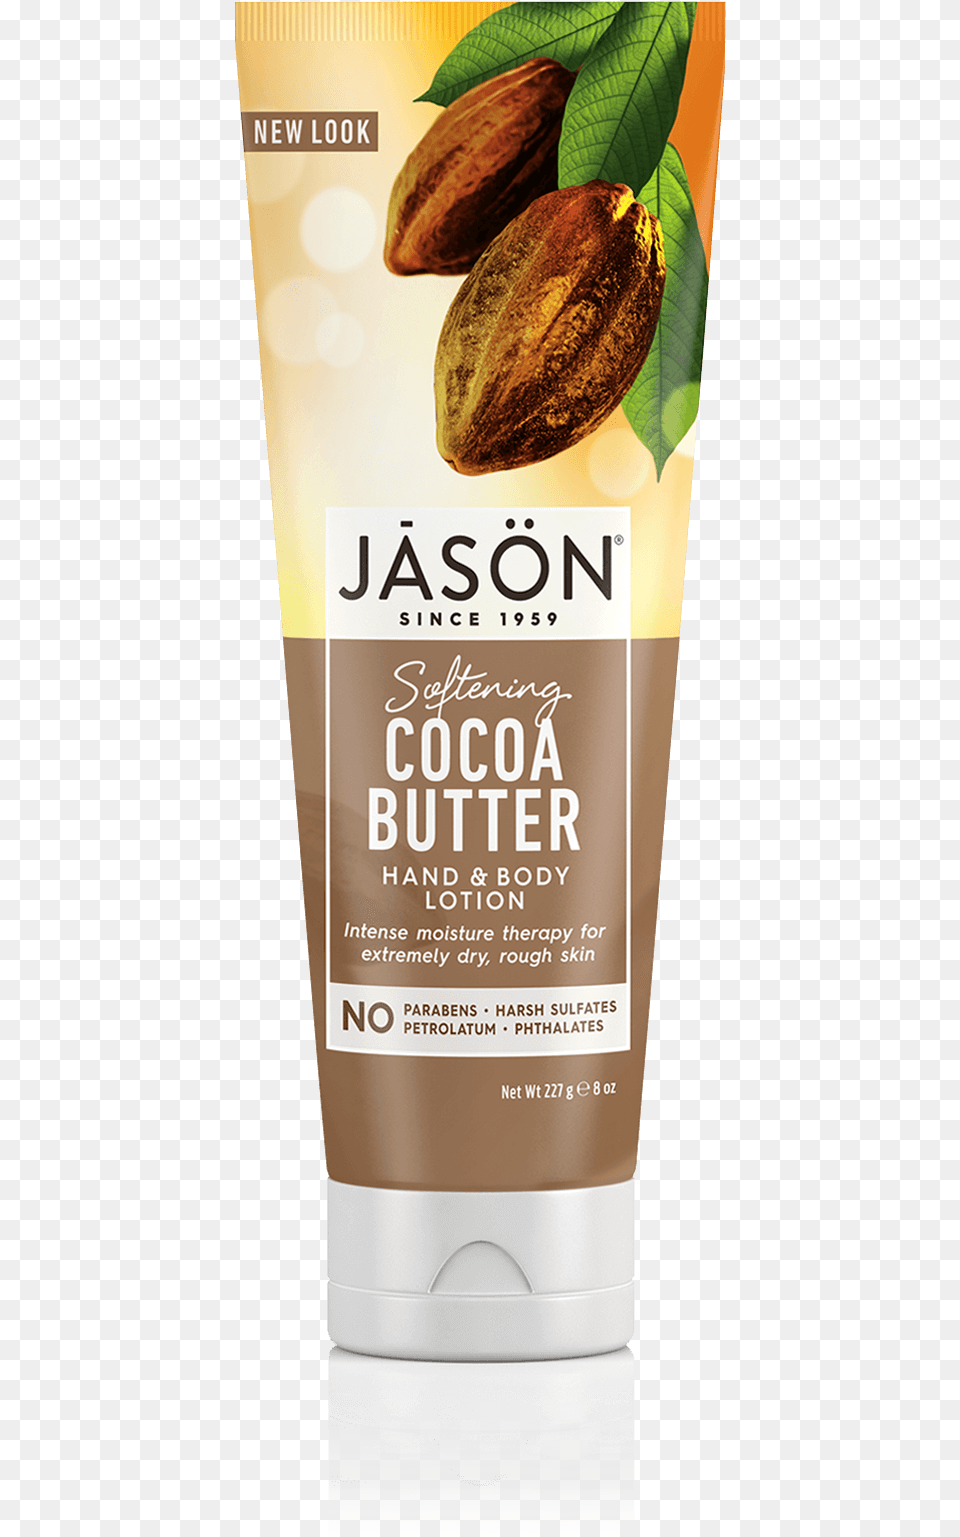 Jason Softening Cocoa Butter Hand And Body Lotion, Dessert, Food, Advertisement Png Image